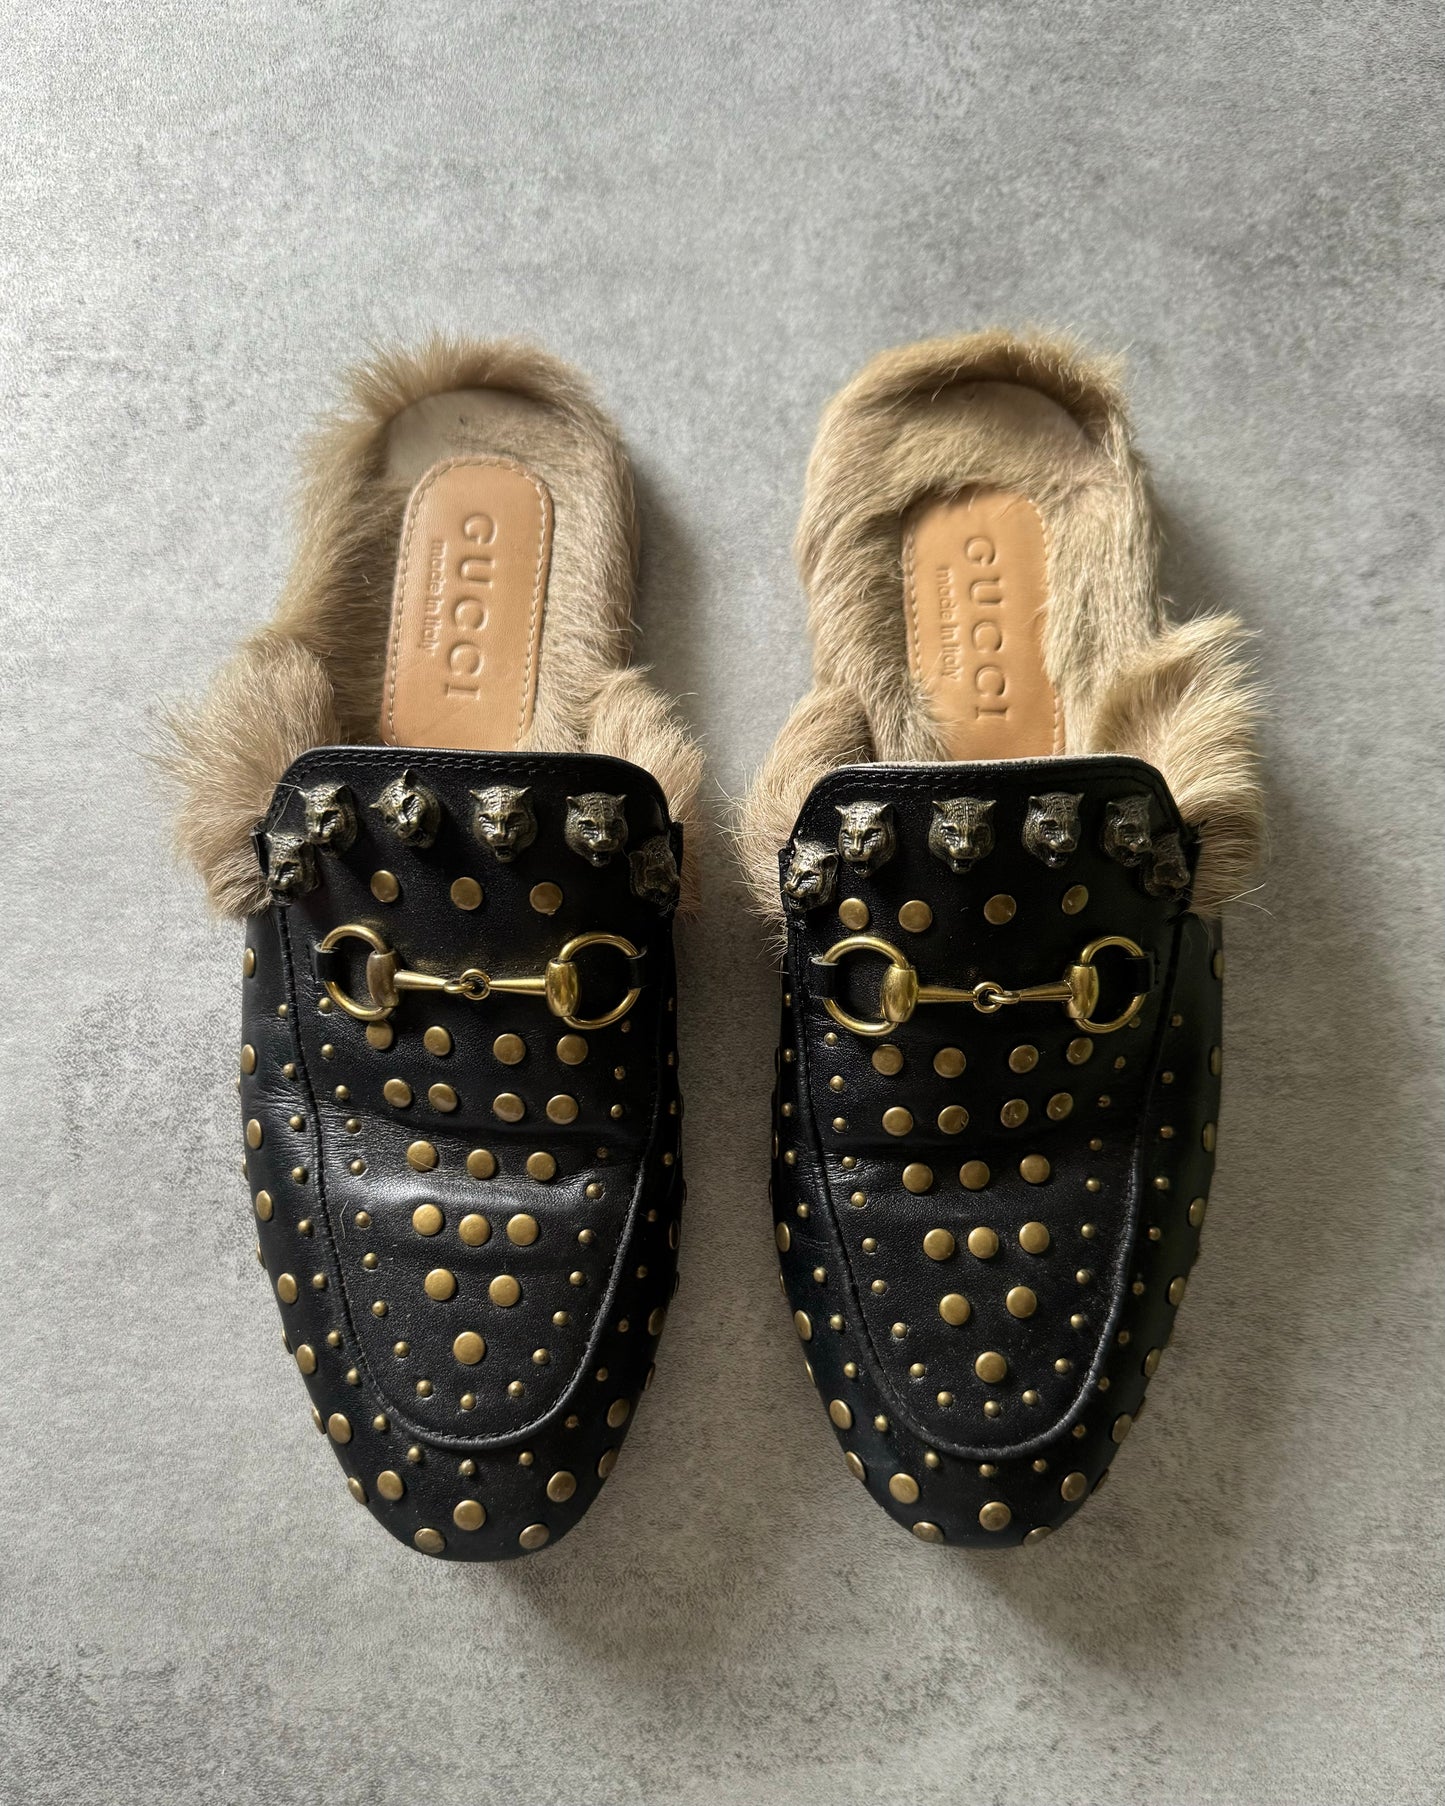 Gucci Princetown Studded Leather Fur Mules (38) - 2